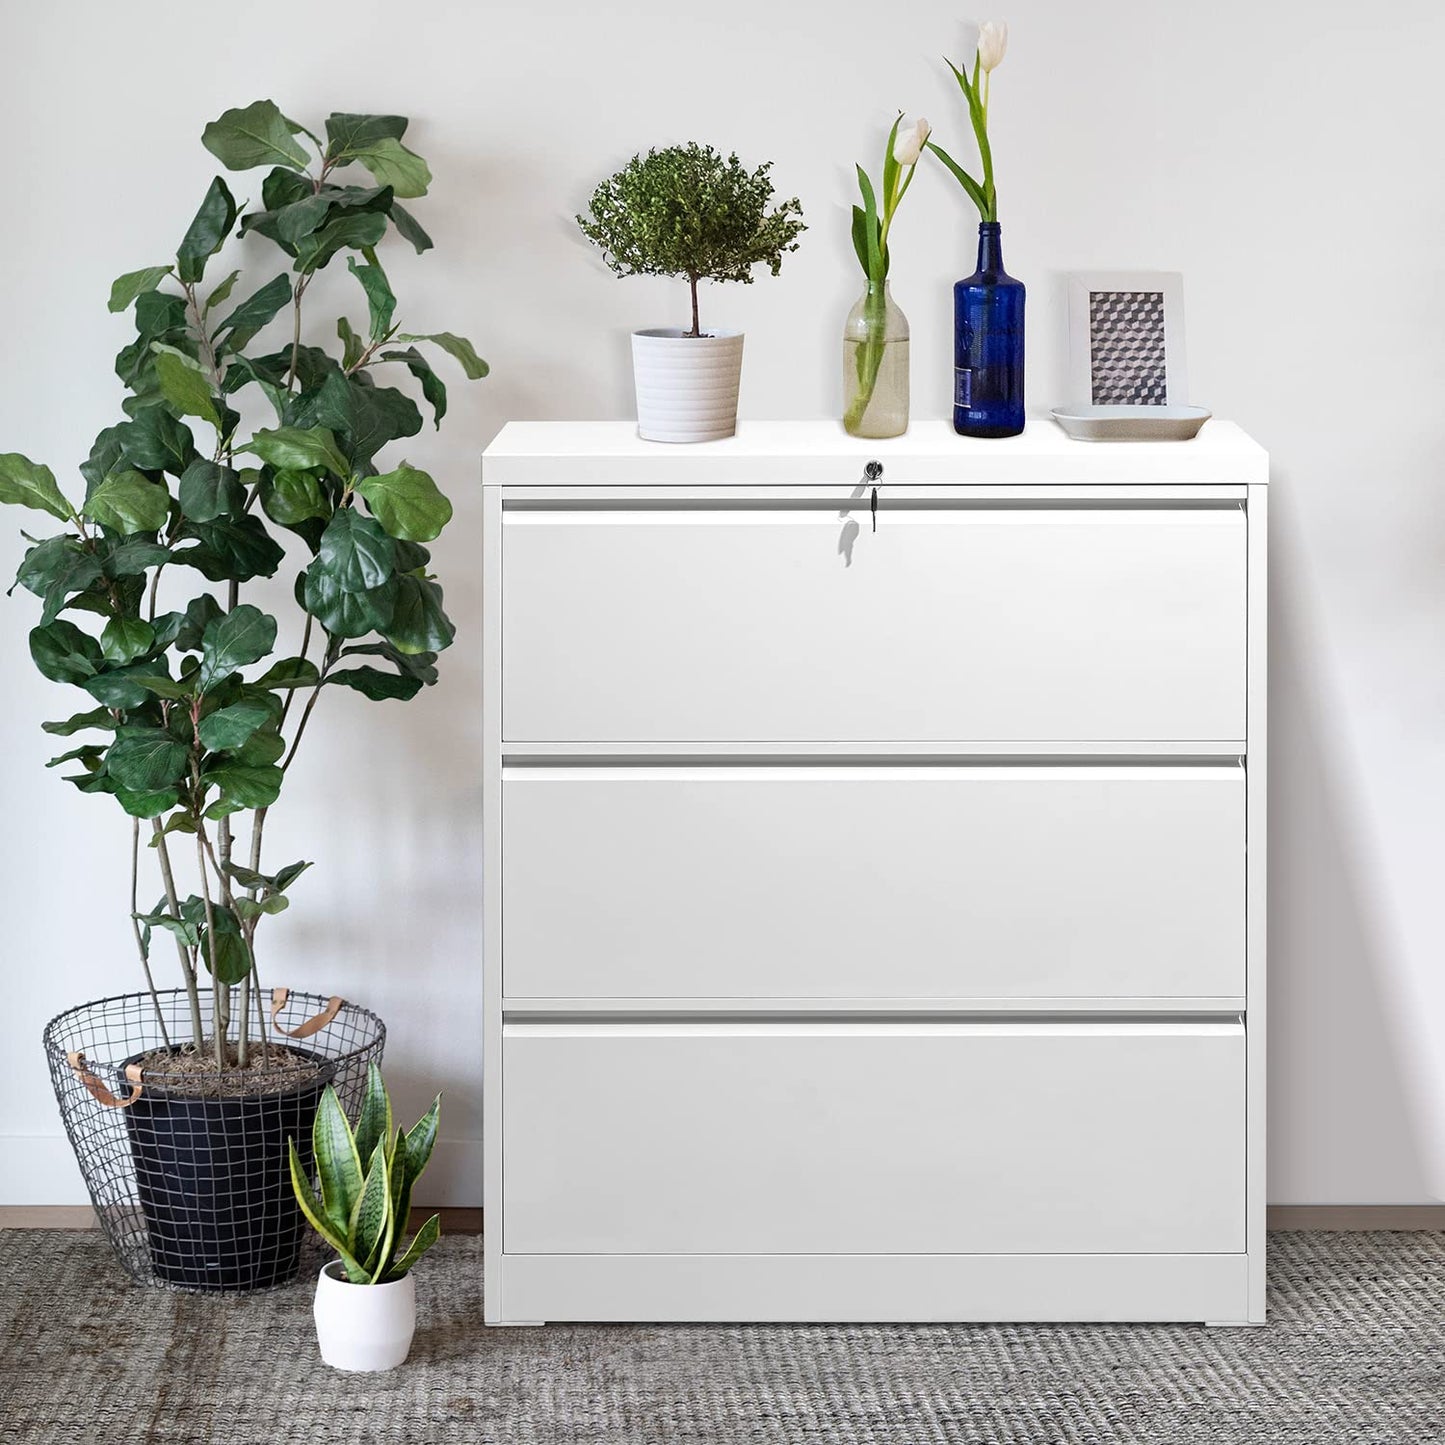 INTERGREAT White File Cabinet 3 Drawer, Metal Lateral Filing Cabinet with Lock, Locking White Horizontal Cabinet with Adjustable Frame for Home